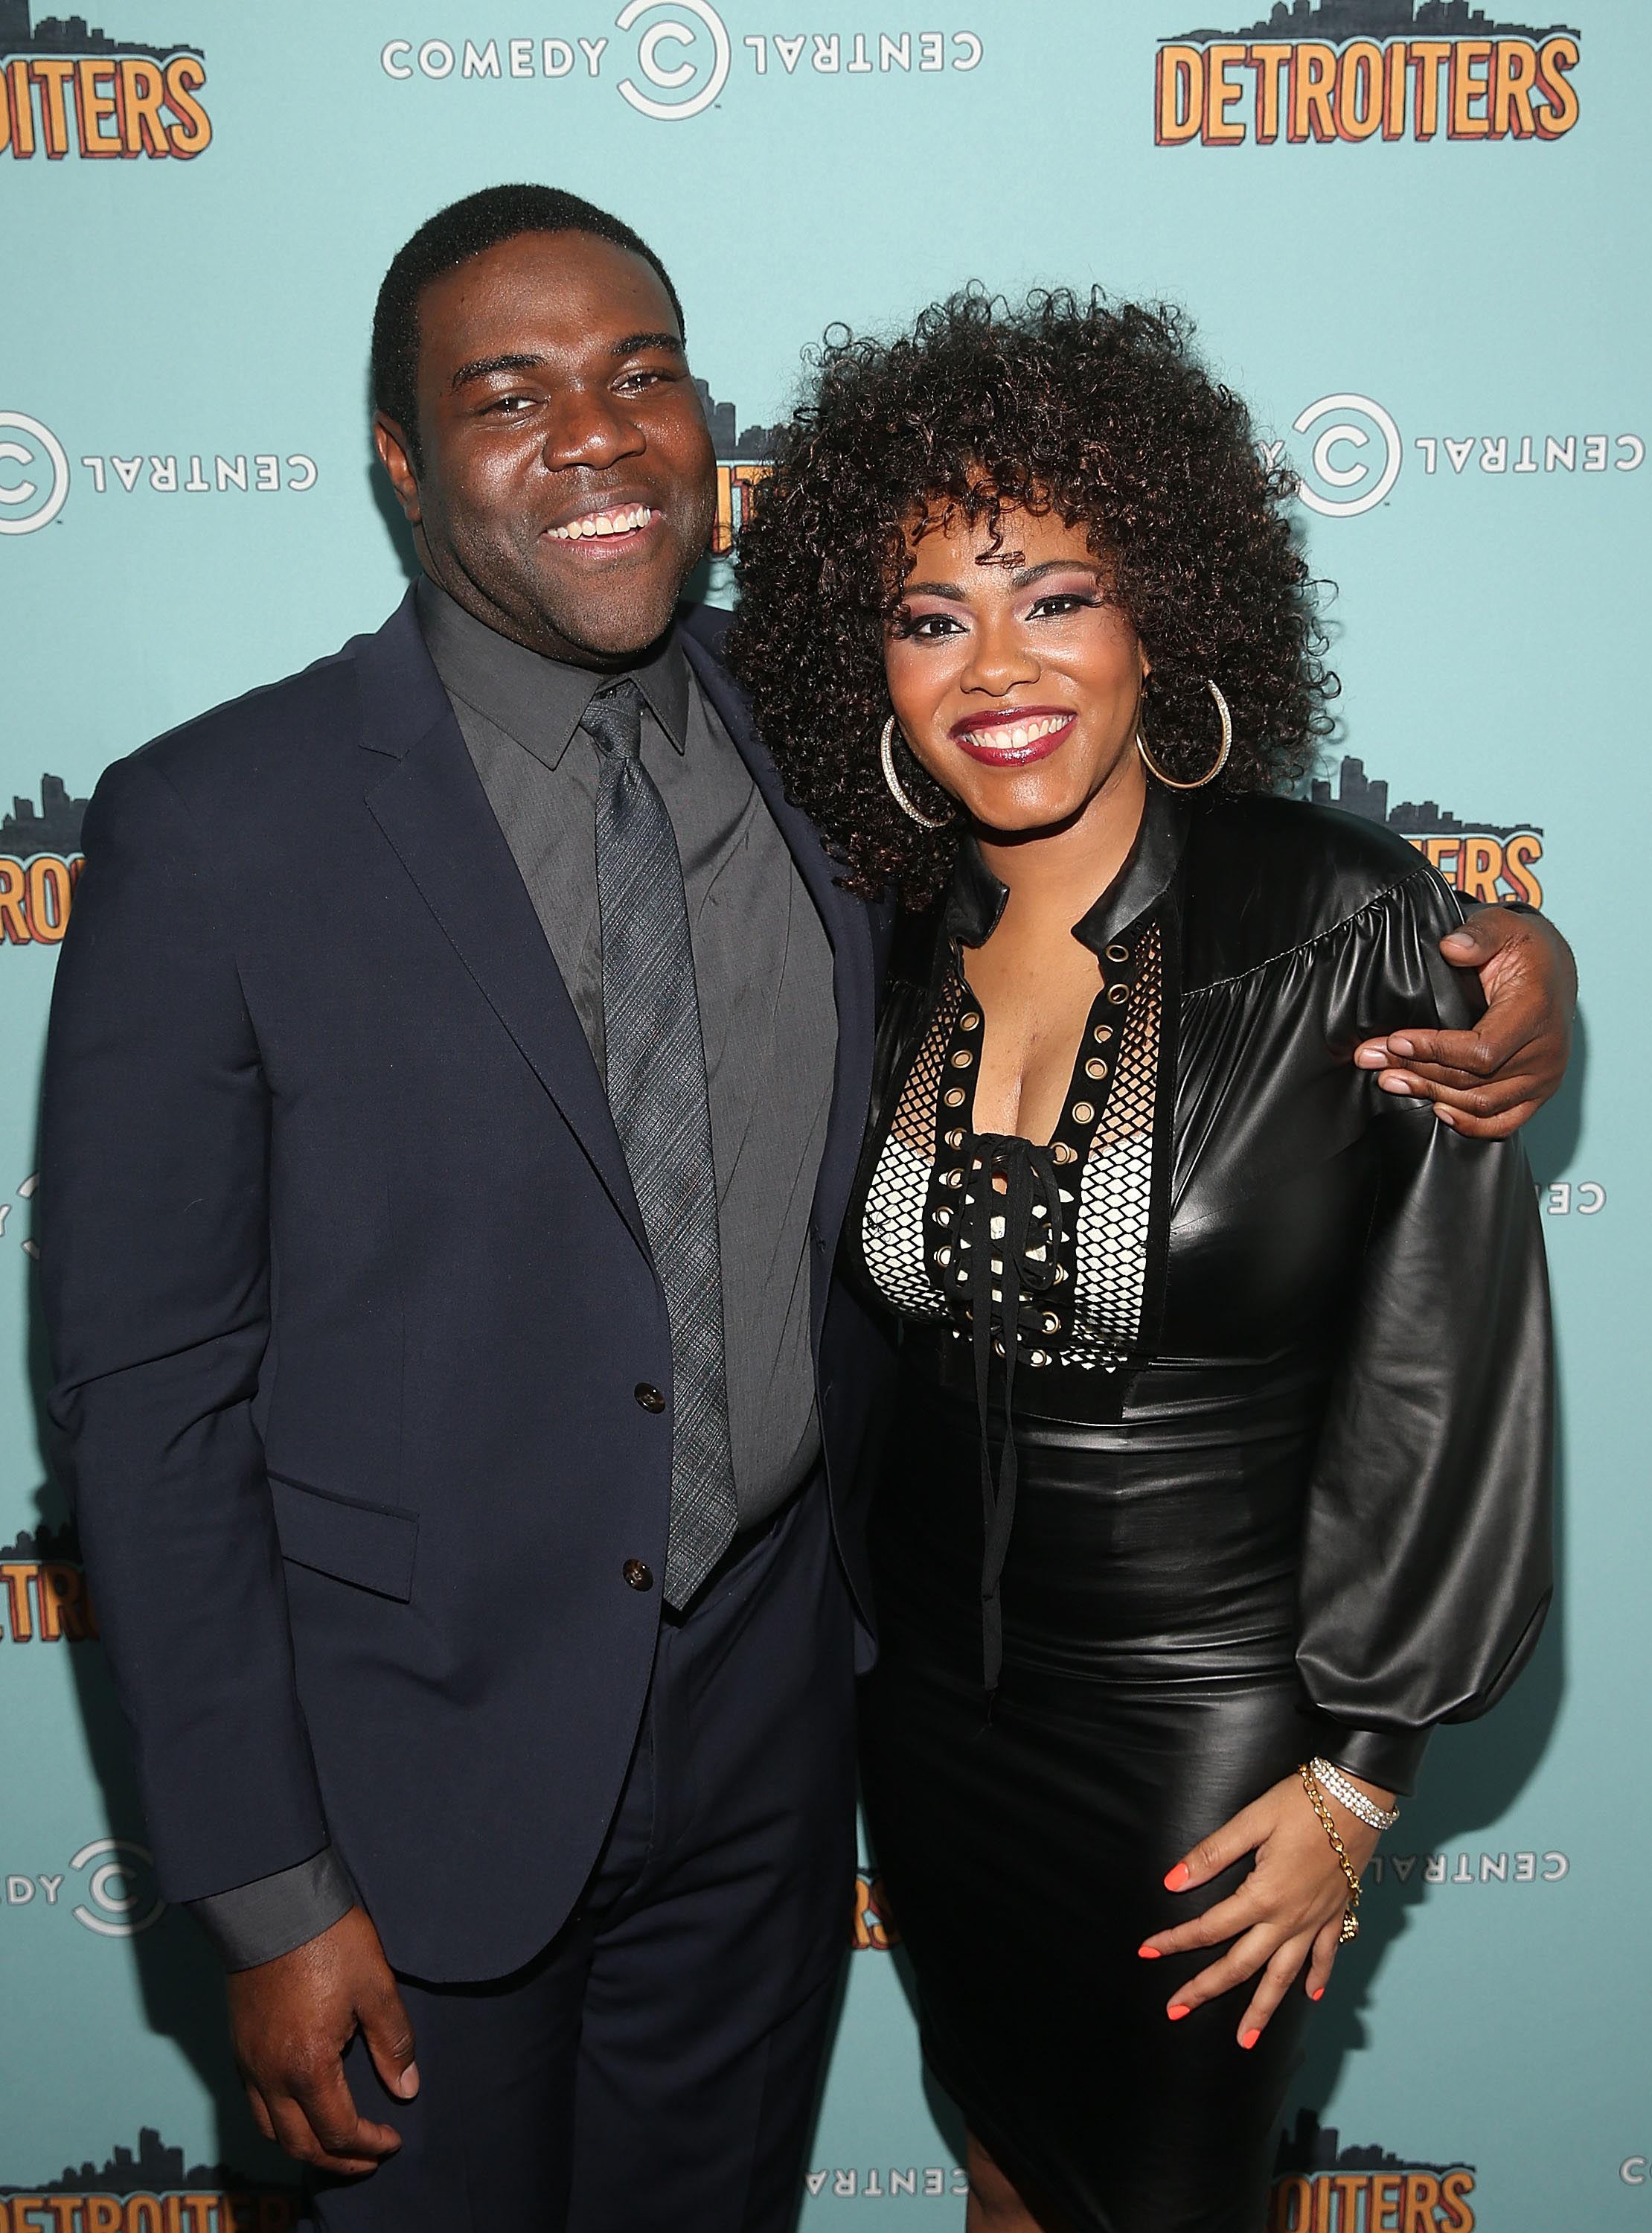 Shawntay Dalon attends Comedy Central’s ‘Detroiters’ Premiere Party